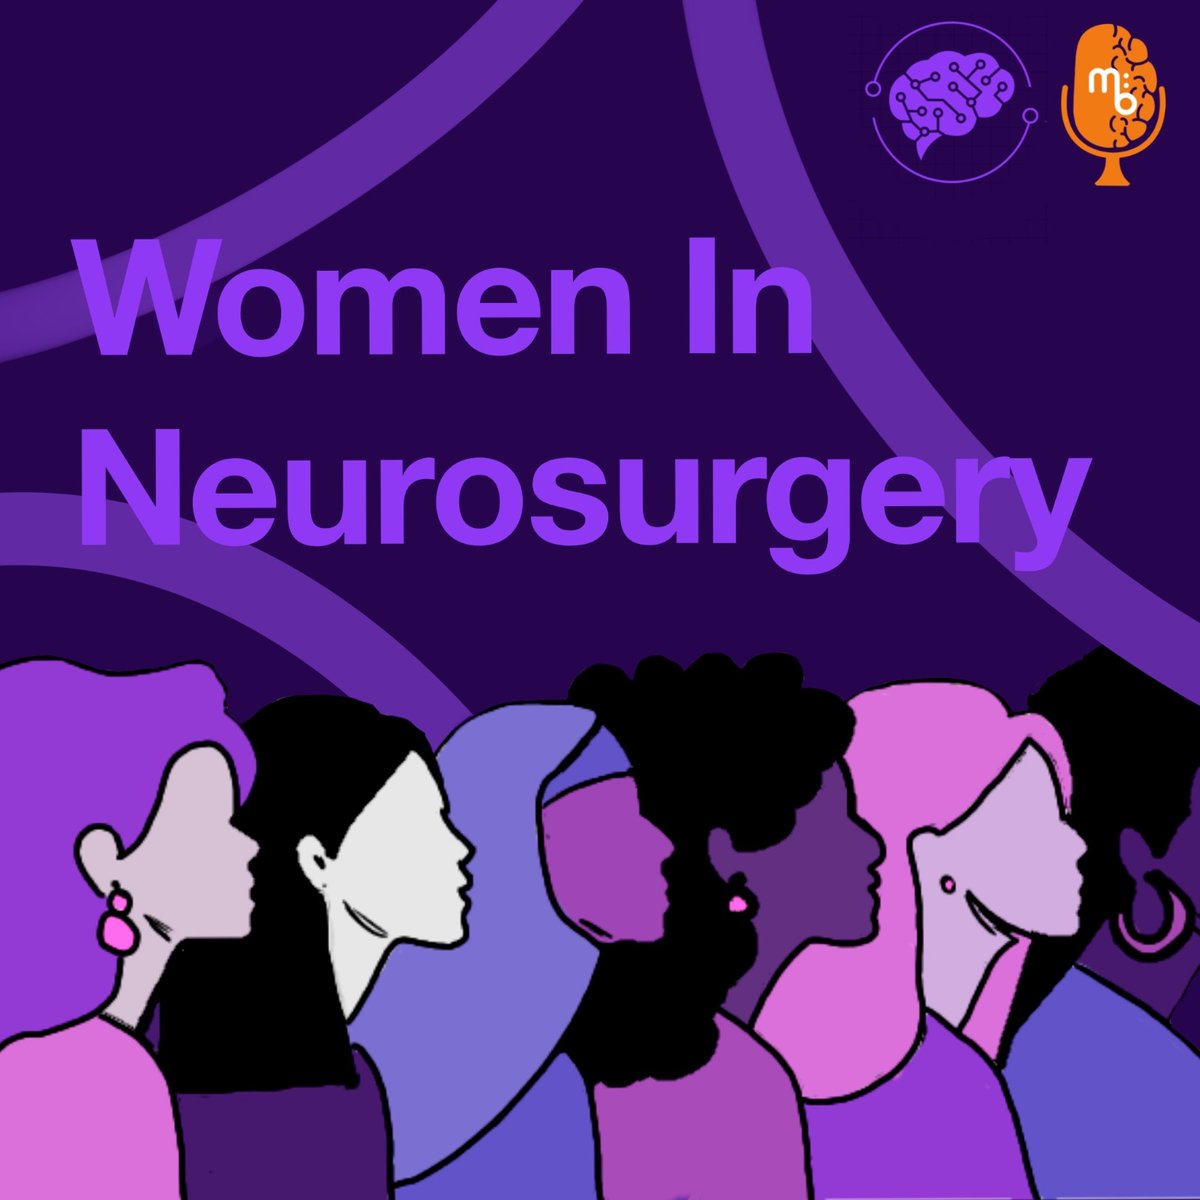 🎙️✨ Exciting Announcement! Introducing missionbrainpodcast 's 'Women in Neurosurgery' series! 💪🧠 Join us as we celebrate the groundbreaking journeys of extraordinary women shaping the future of neurosurgery 💜 #WomenInNeurosurgery #MissionBrainPodcast #EmpoweringWomen 🌟